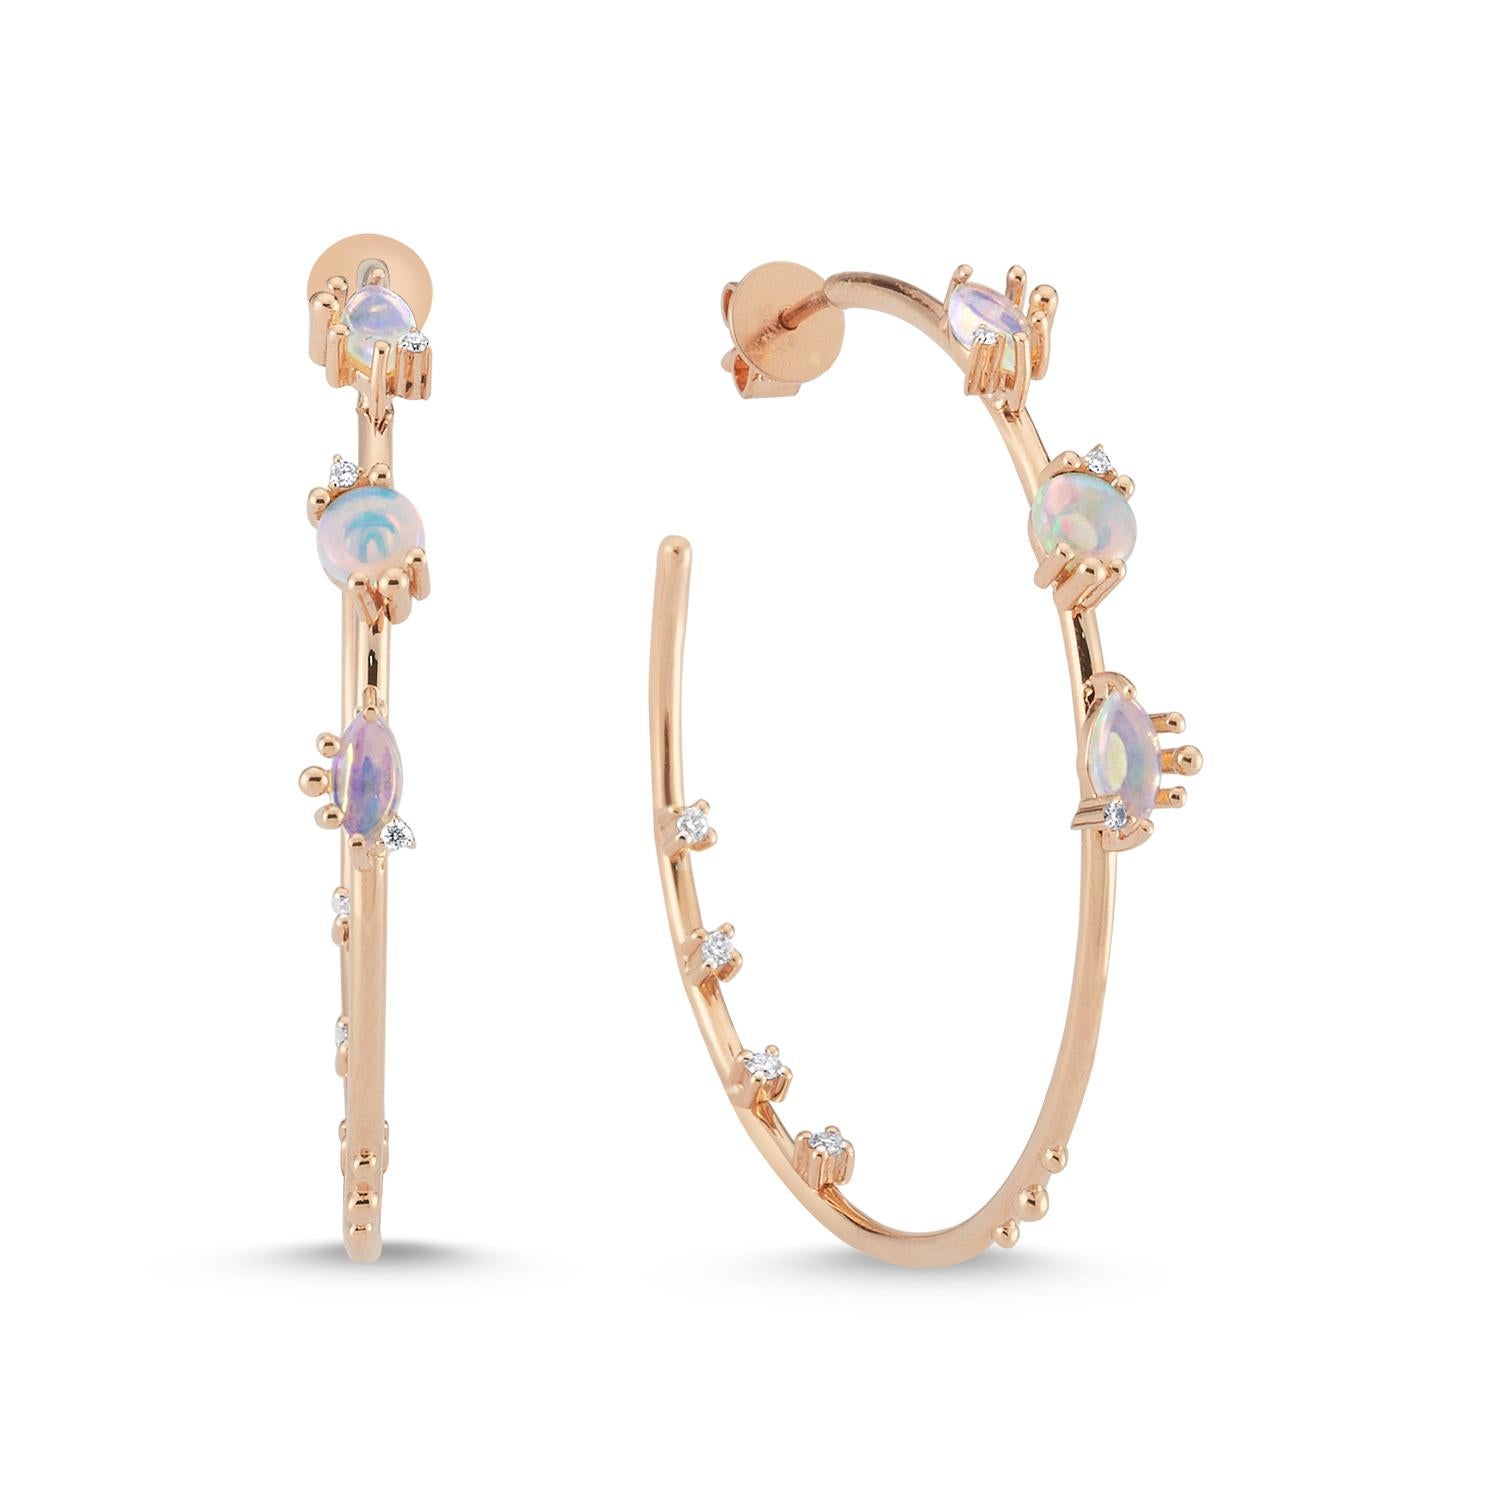 Cacia Hoop 14K Rose Gold Earrings With Opal By Selda Jewellery

Additional Information:
Collection: Treasures Of The Sea Collection
14K Rose Gold
0.16Ct White Diamond
0.41Ct White Opal